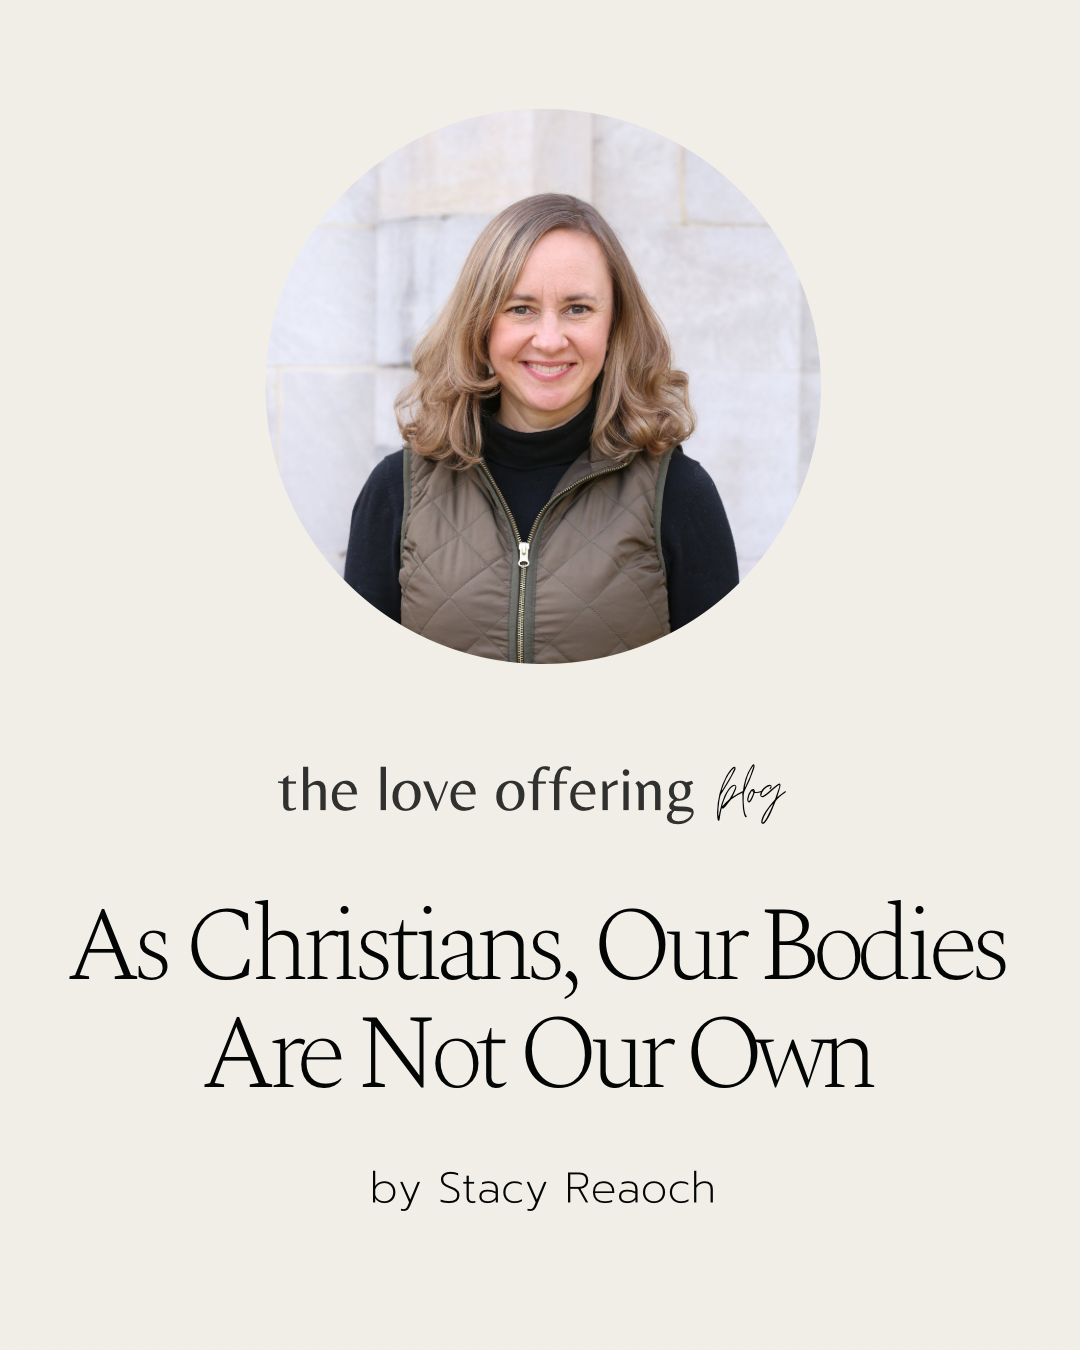 As Christians, Our Bodies Are Not Our Own by Stacy Reaoch